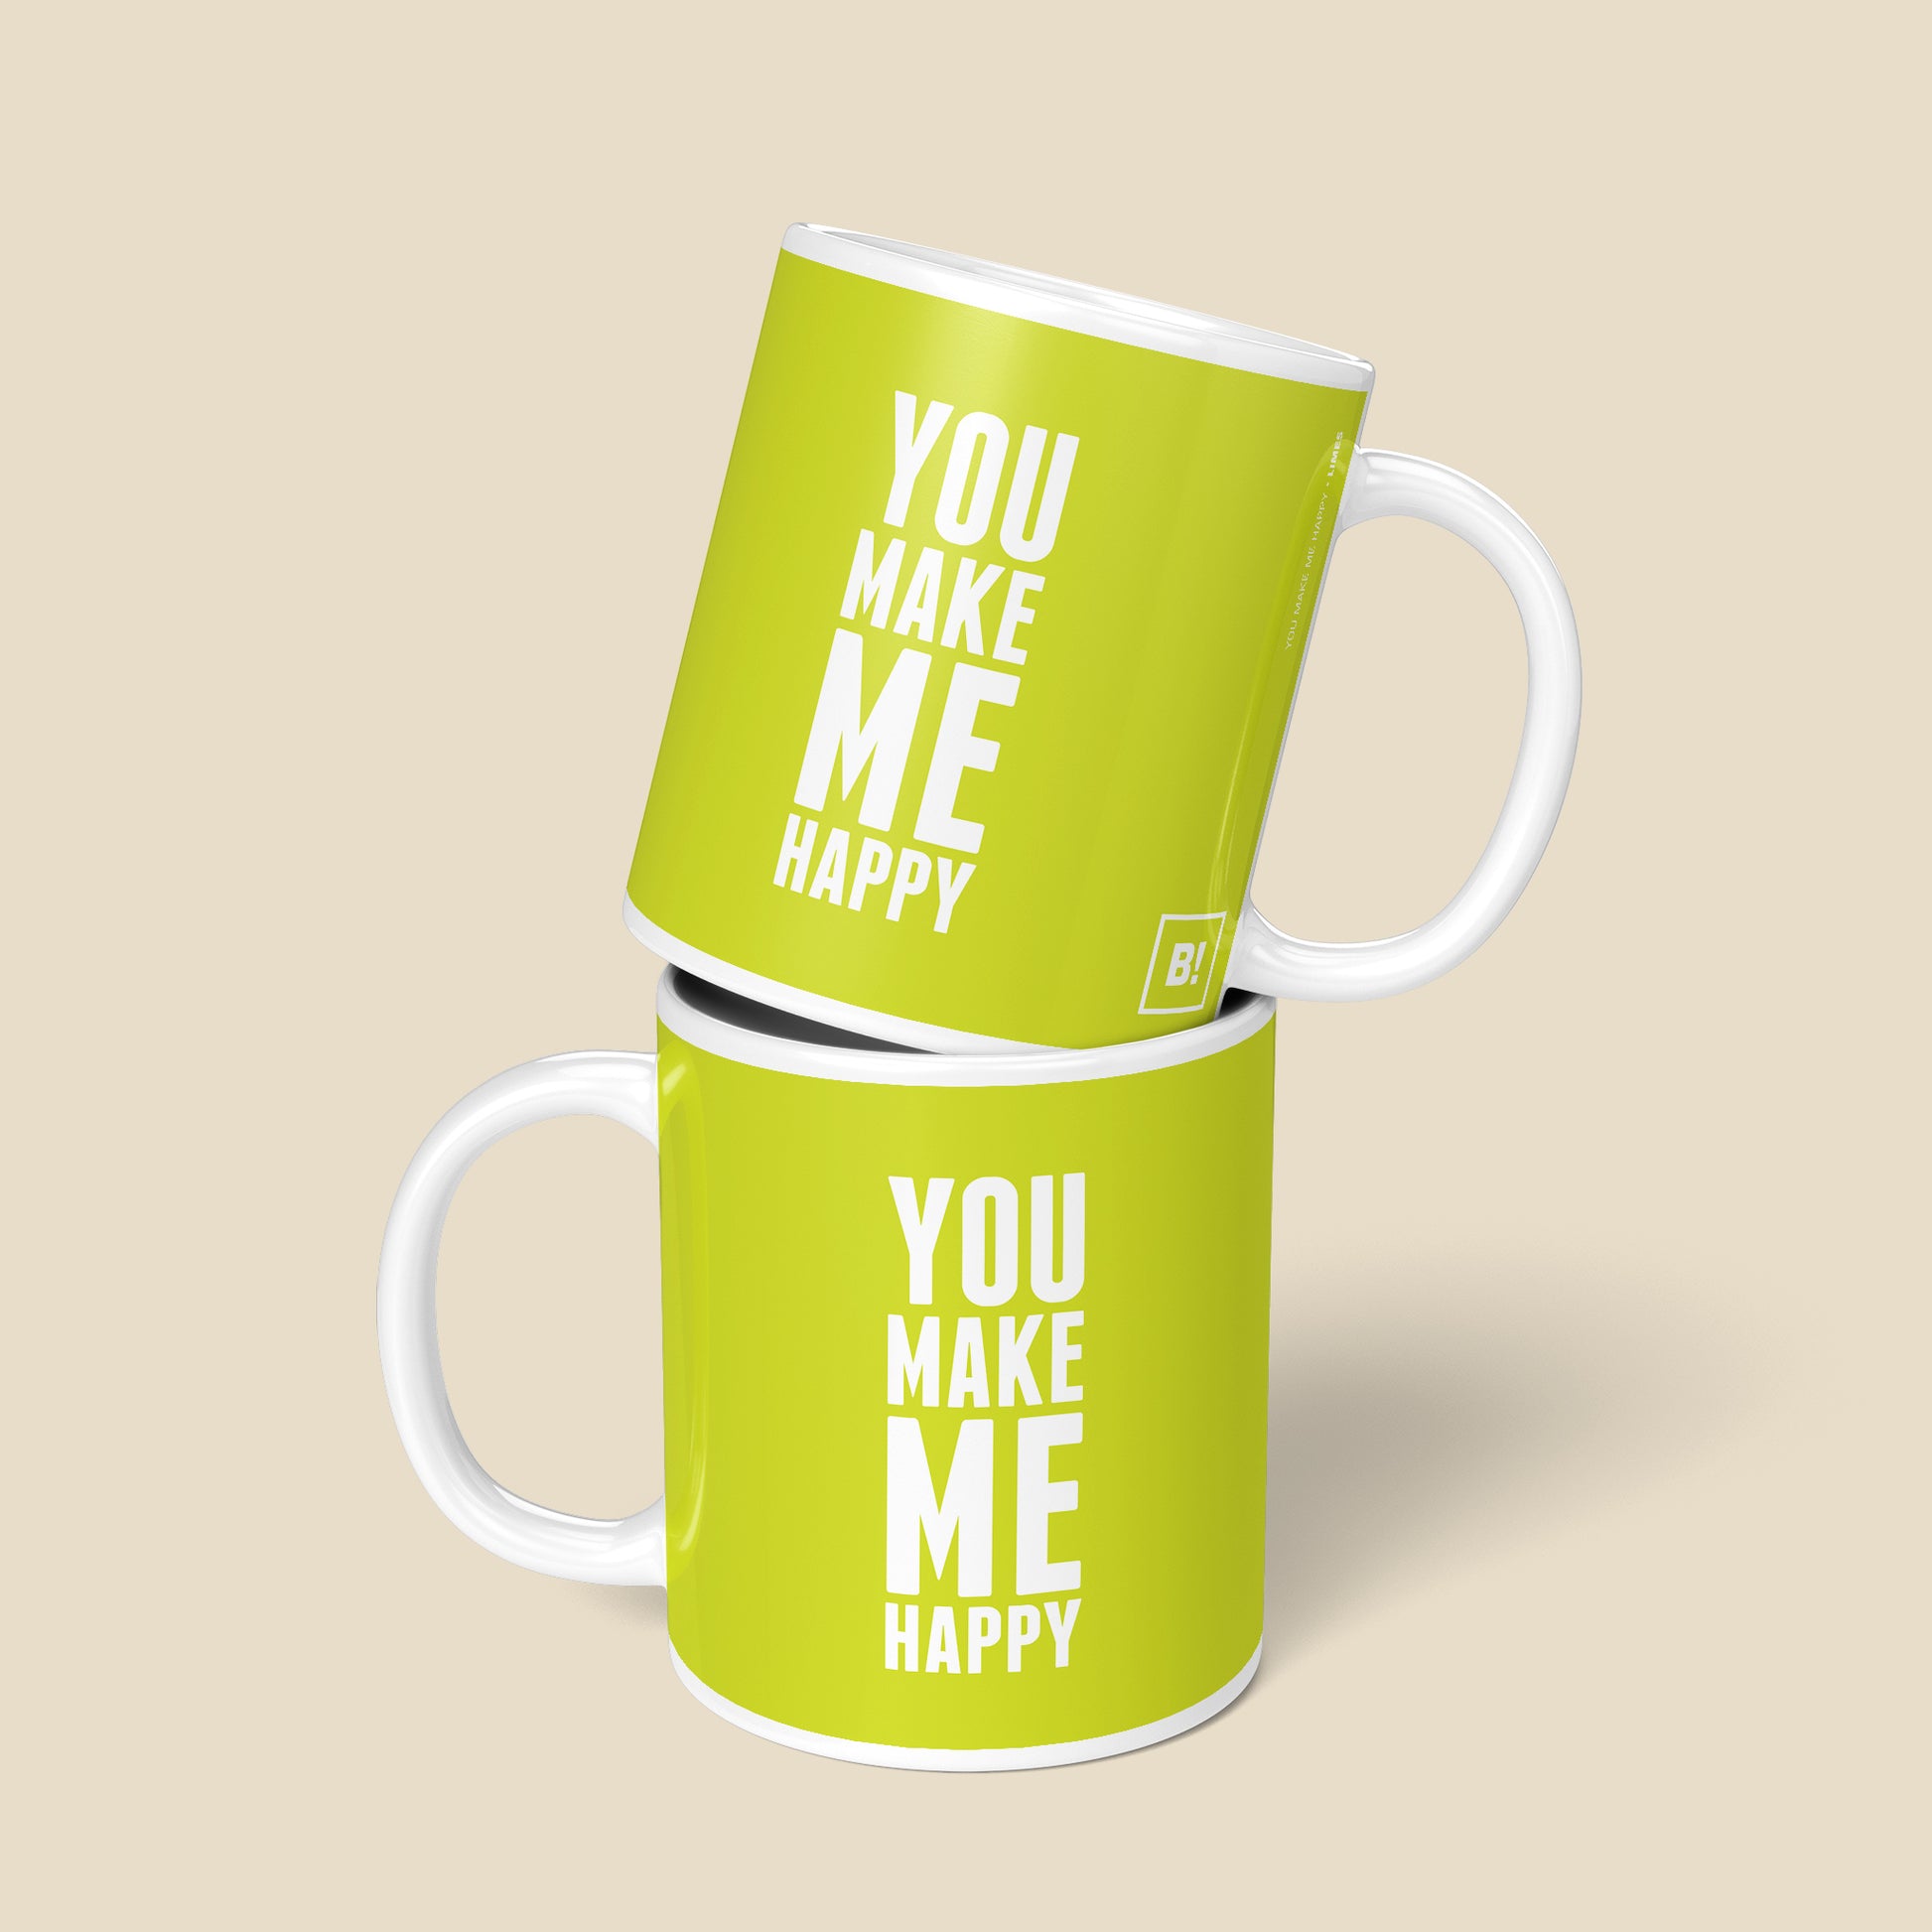 Be inspired by our "You Make Me Happy Coffee Mug" Limes Coffee Mug. Featuring a front and back view of the 11oz mug.